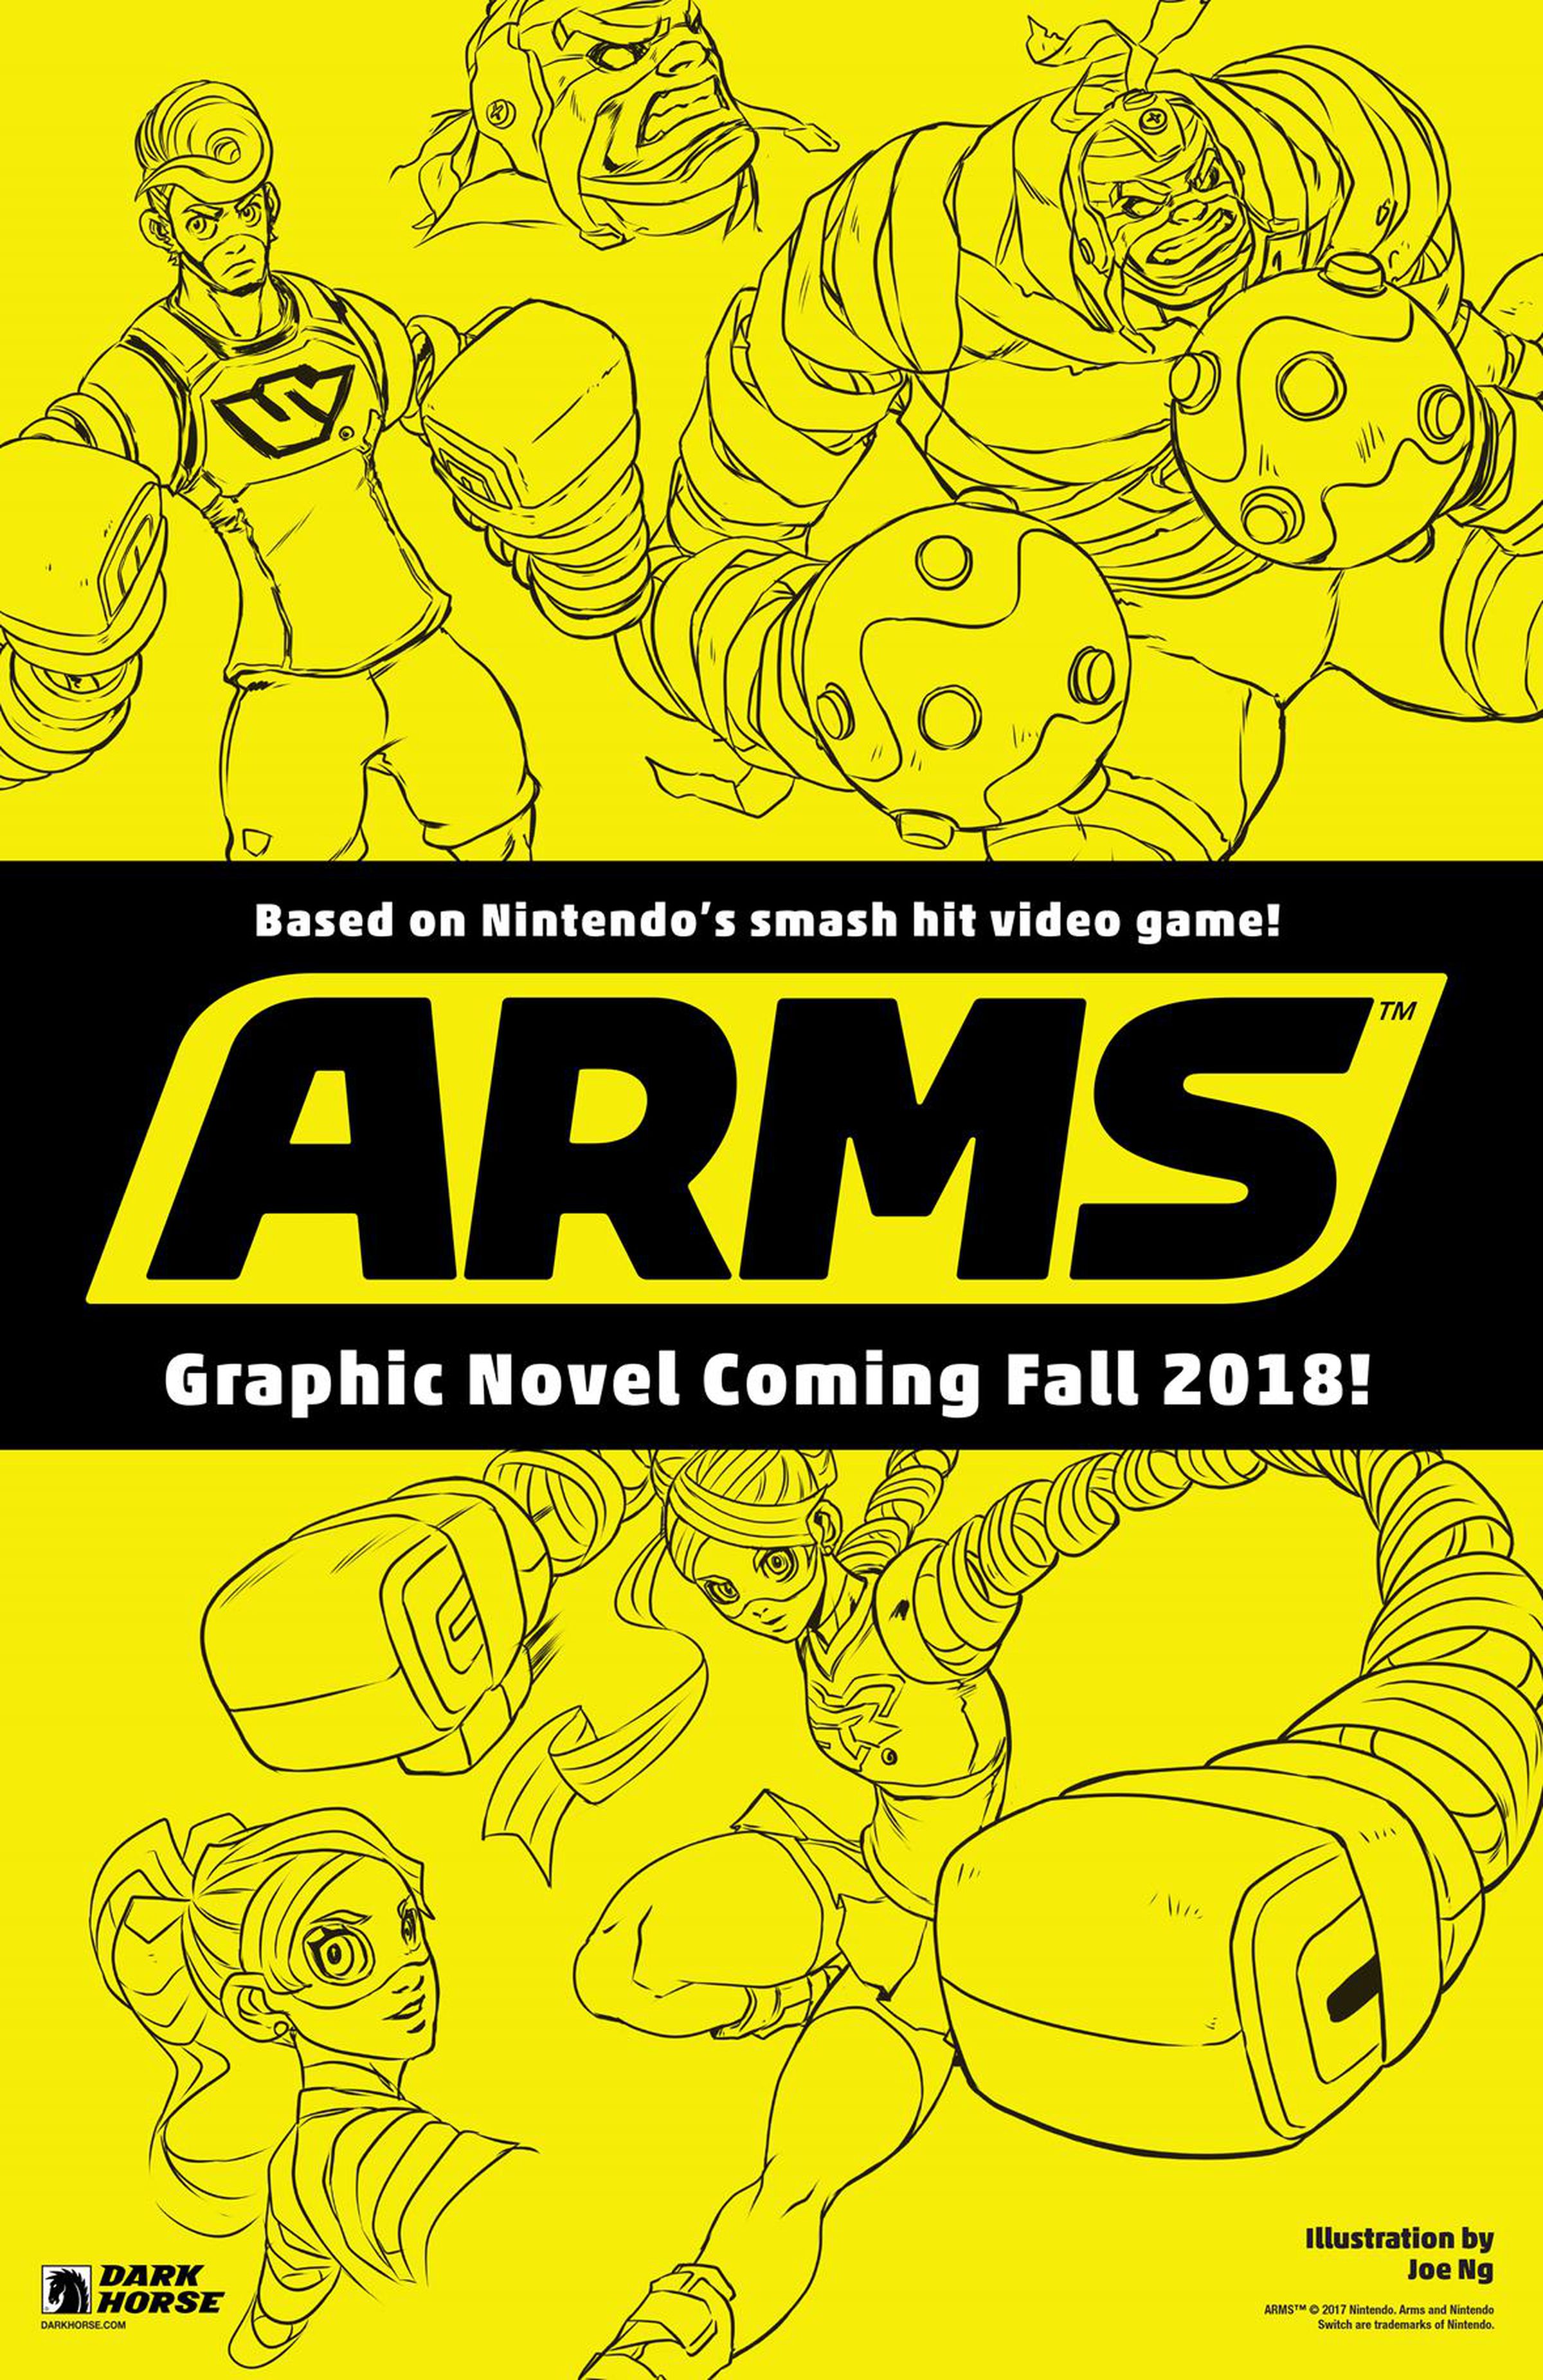 Arms graphic novel cover